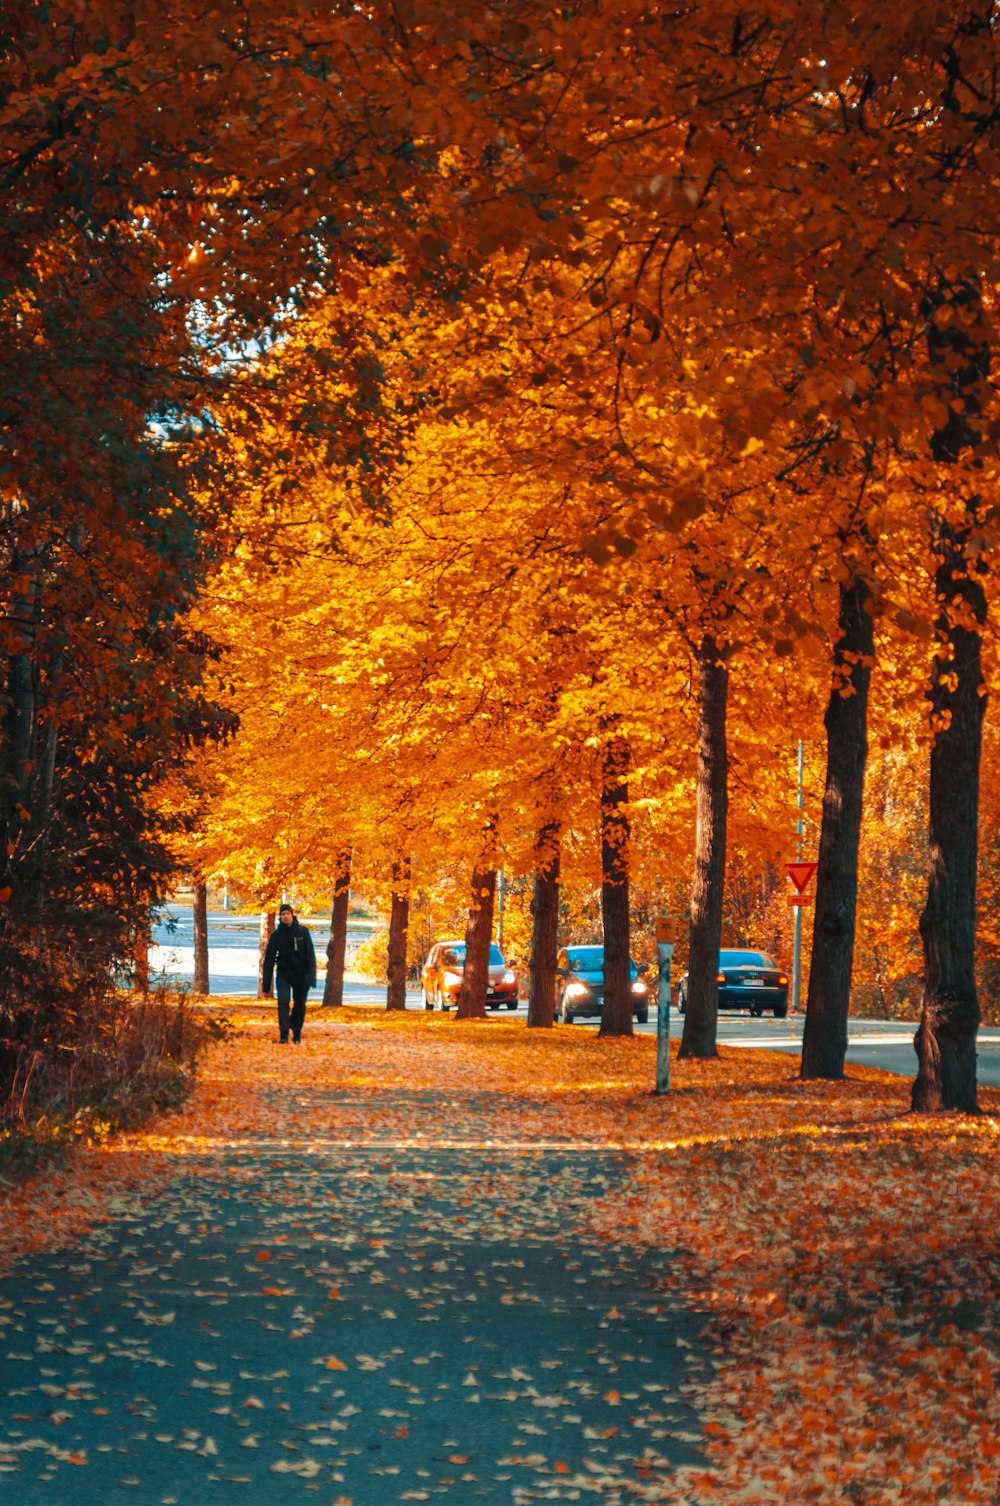 a person walking down a tree lined street